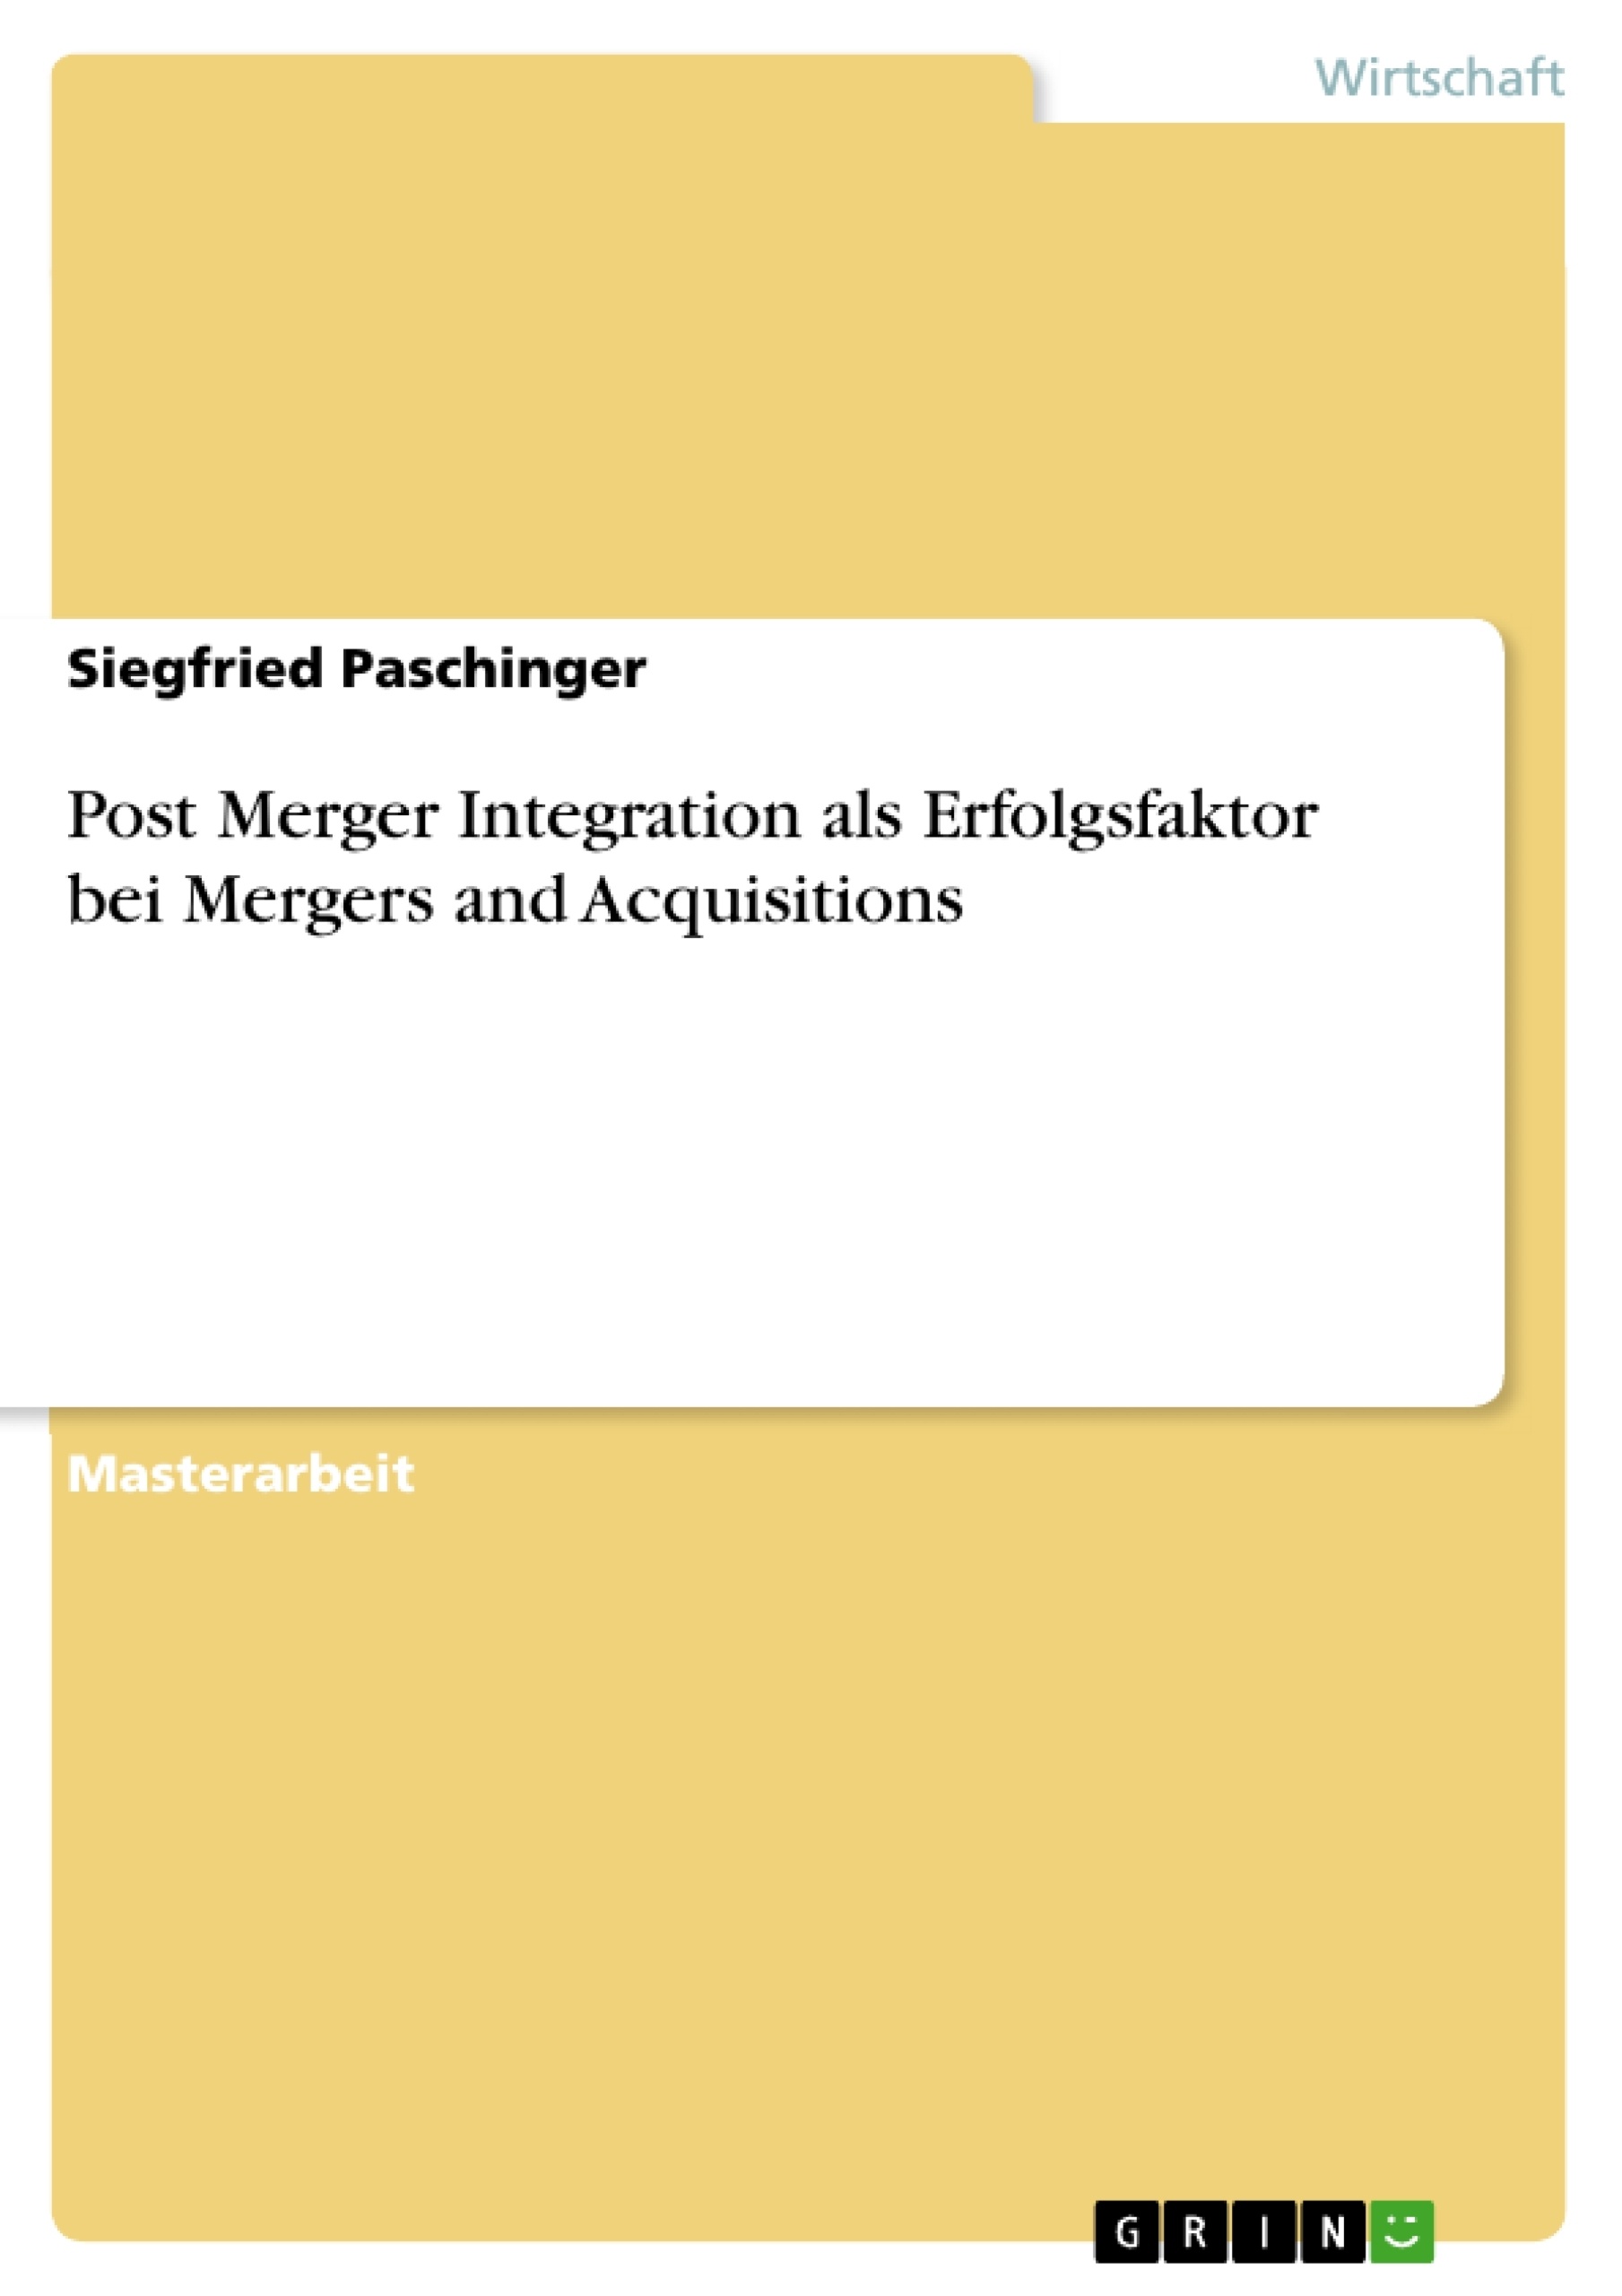 Title: Post Merger Integration als Erfolgsfaktor bei Mergers and Acquisitions